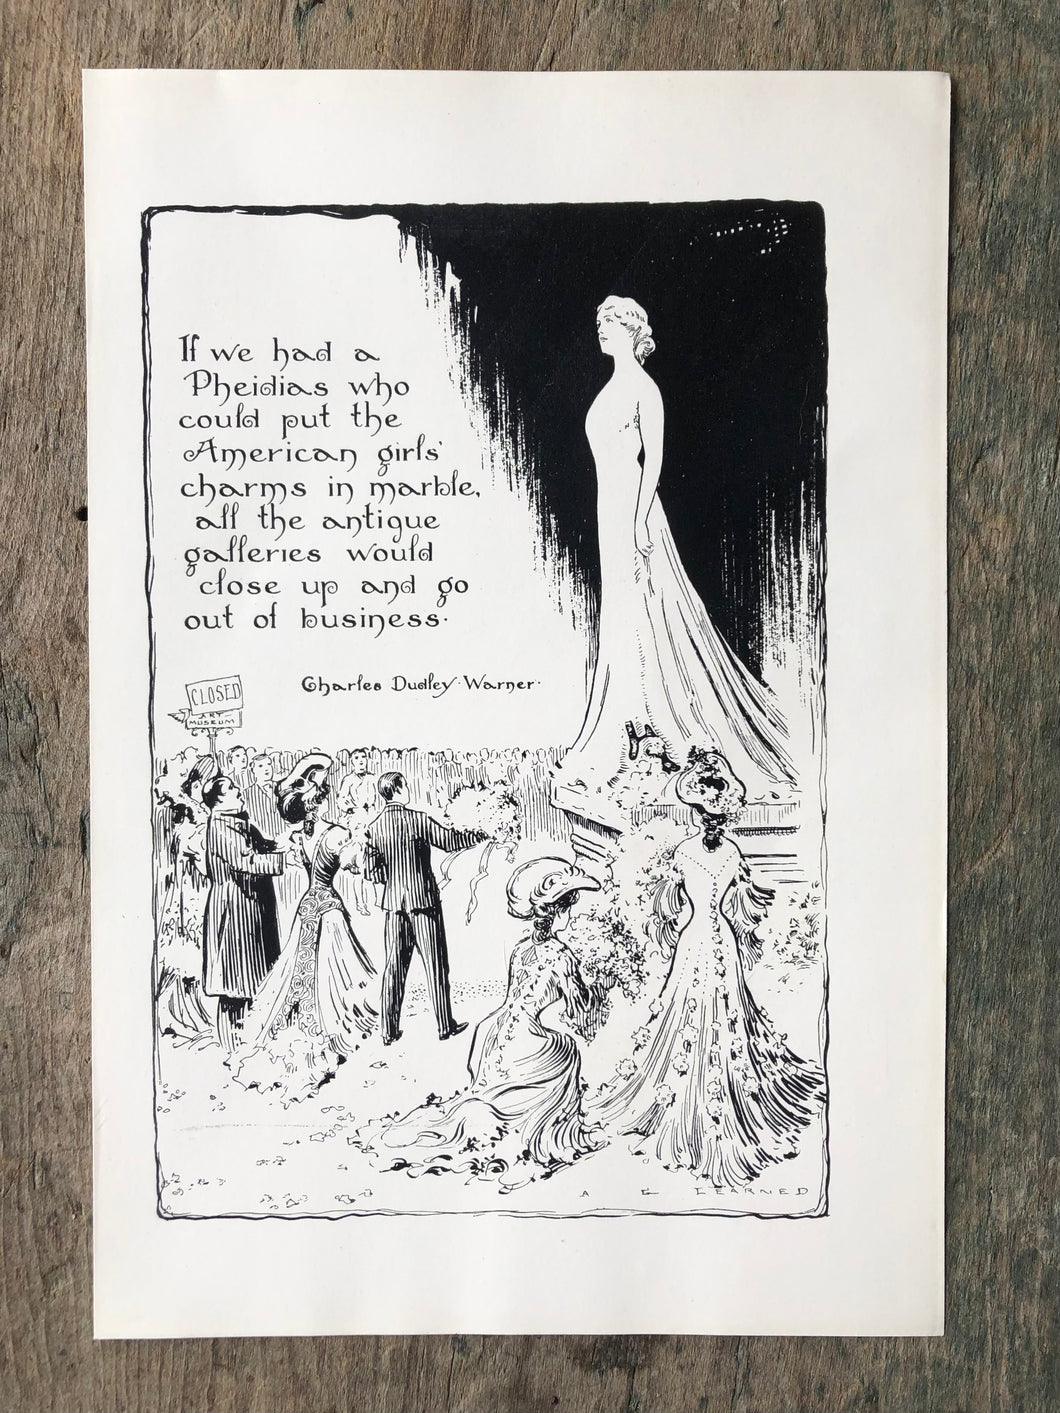 Charles Dudley Warner Quote Print illustrated by Arthur G. Learned from “Eve’s Daughter”